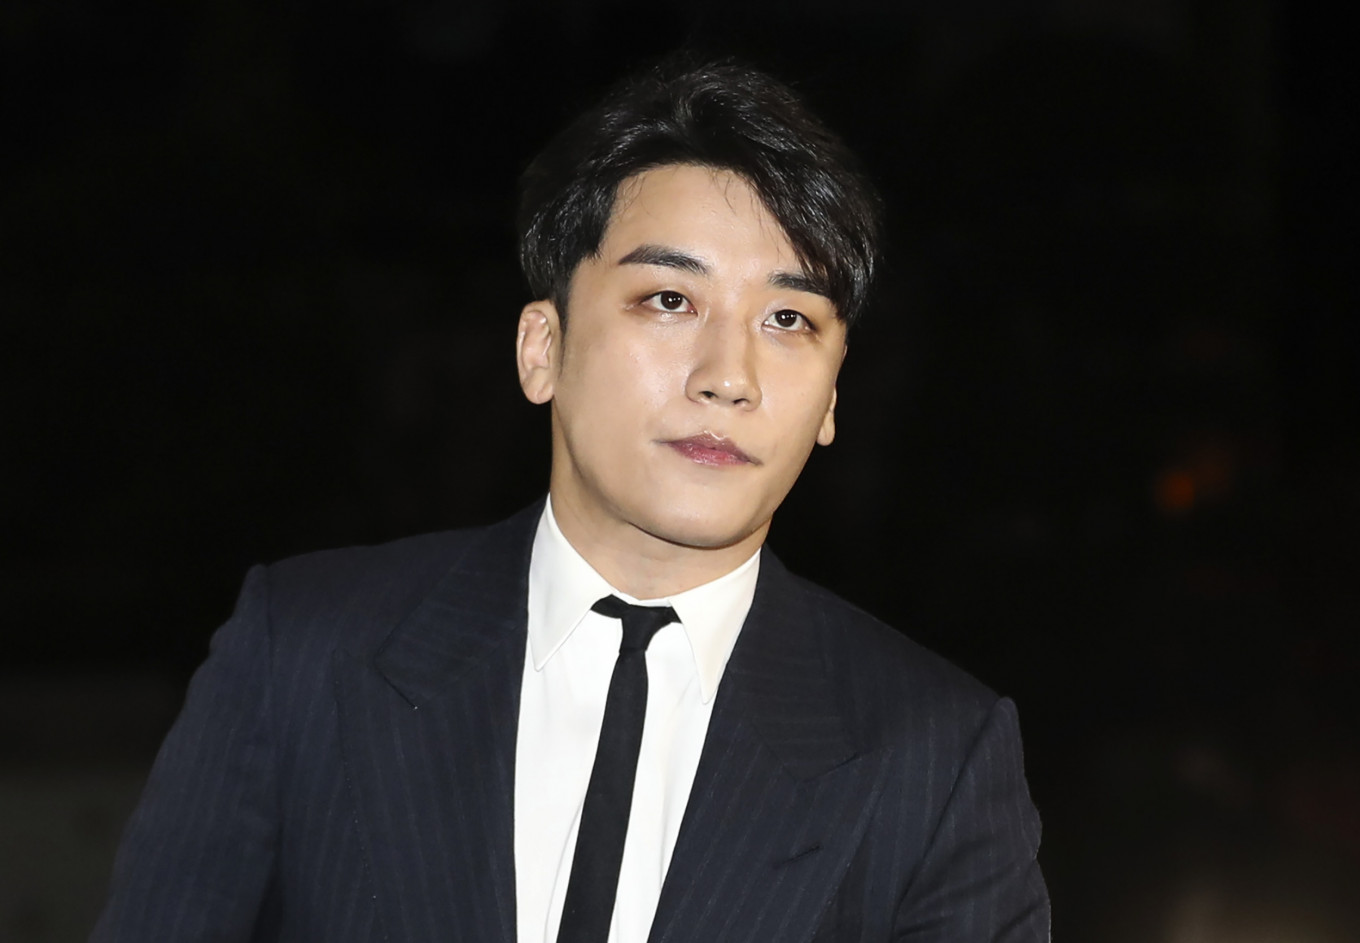 The Attorney's Office Again Requested An Arrest Warrant For Seungri